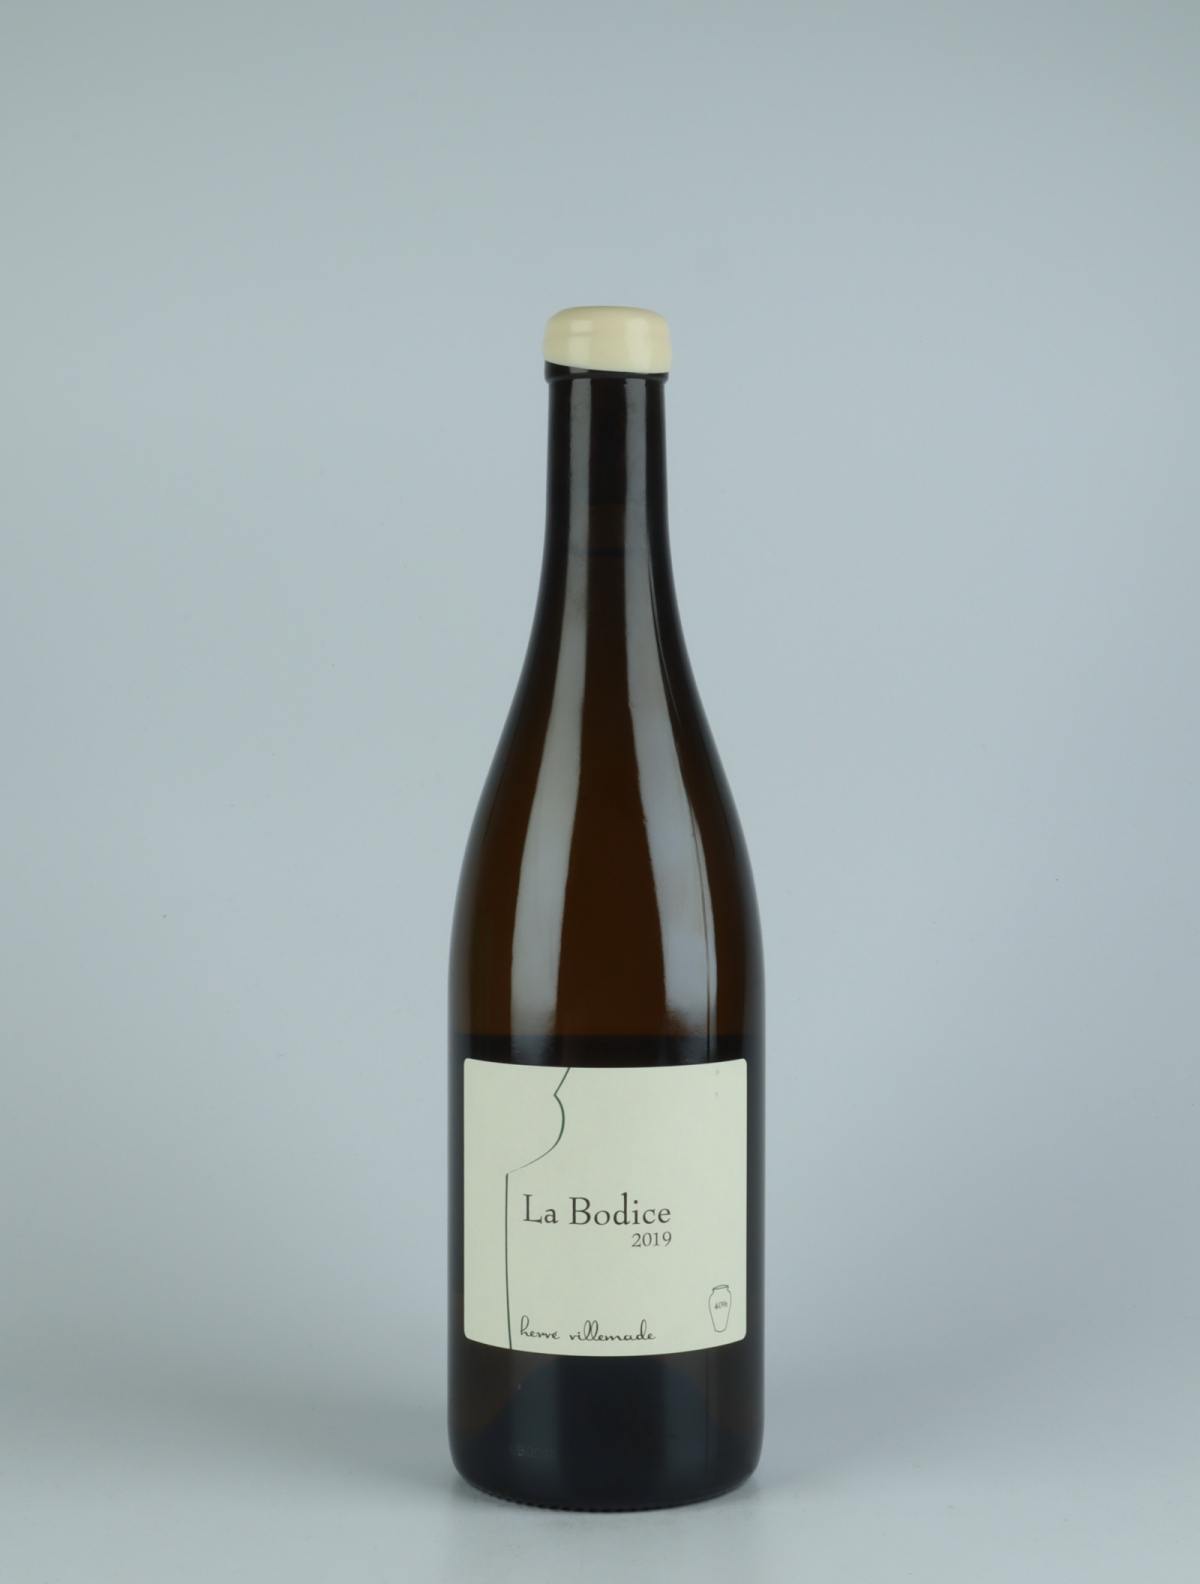 A bottle 2019 Cheverny Blanc - La Bodice White wine from Hervé Villemade, Loire in France